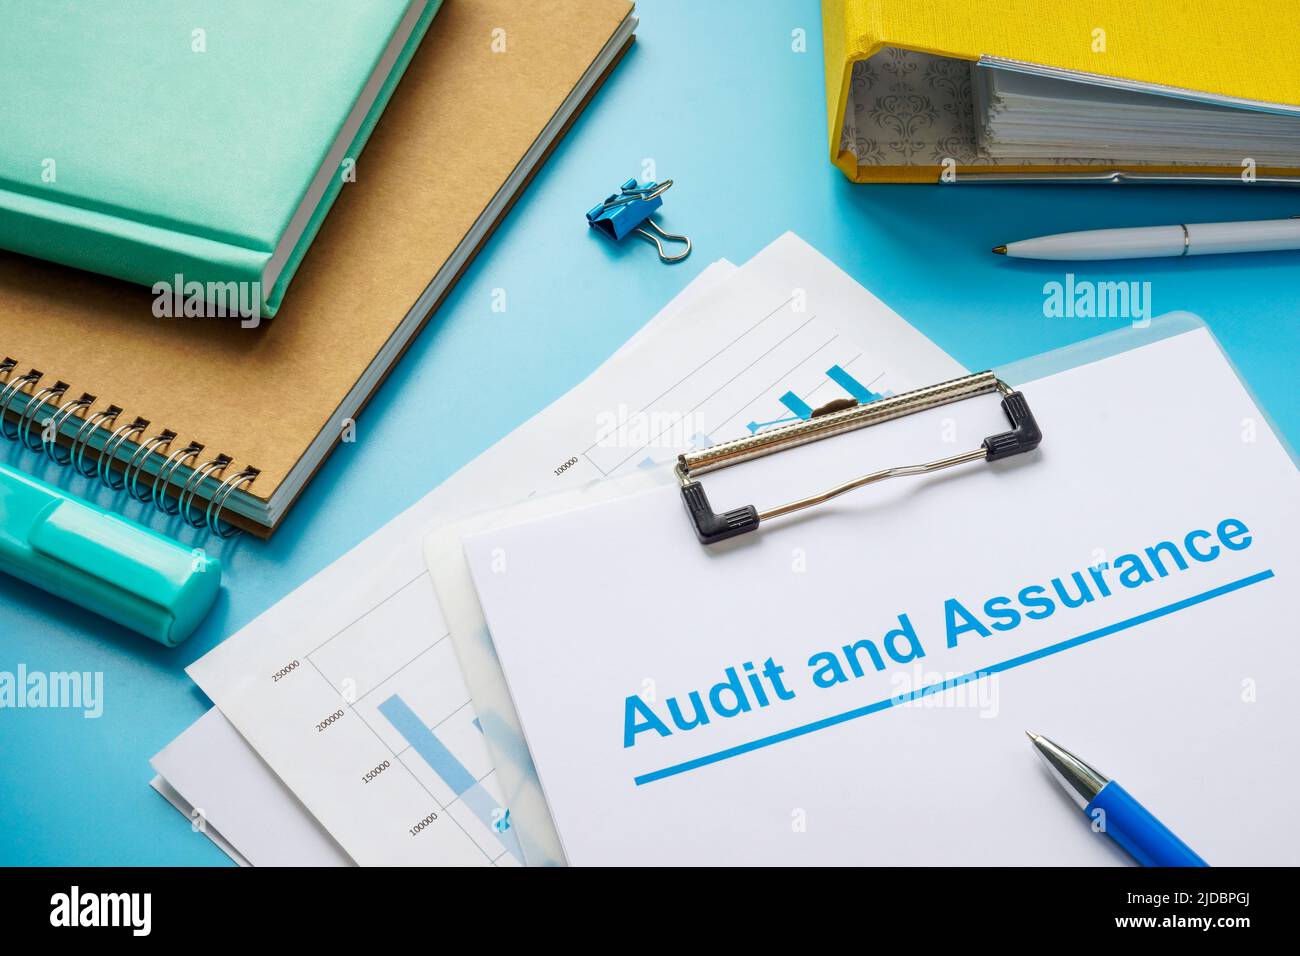 Papers about audit and assurance and folder. Stock Photo